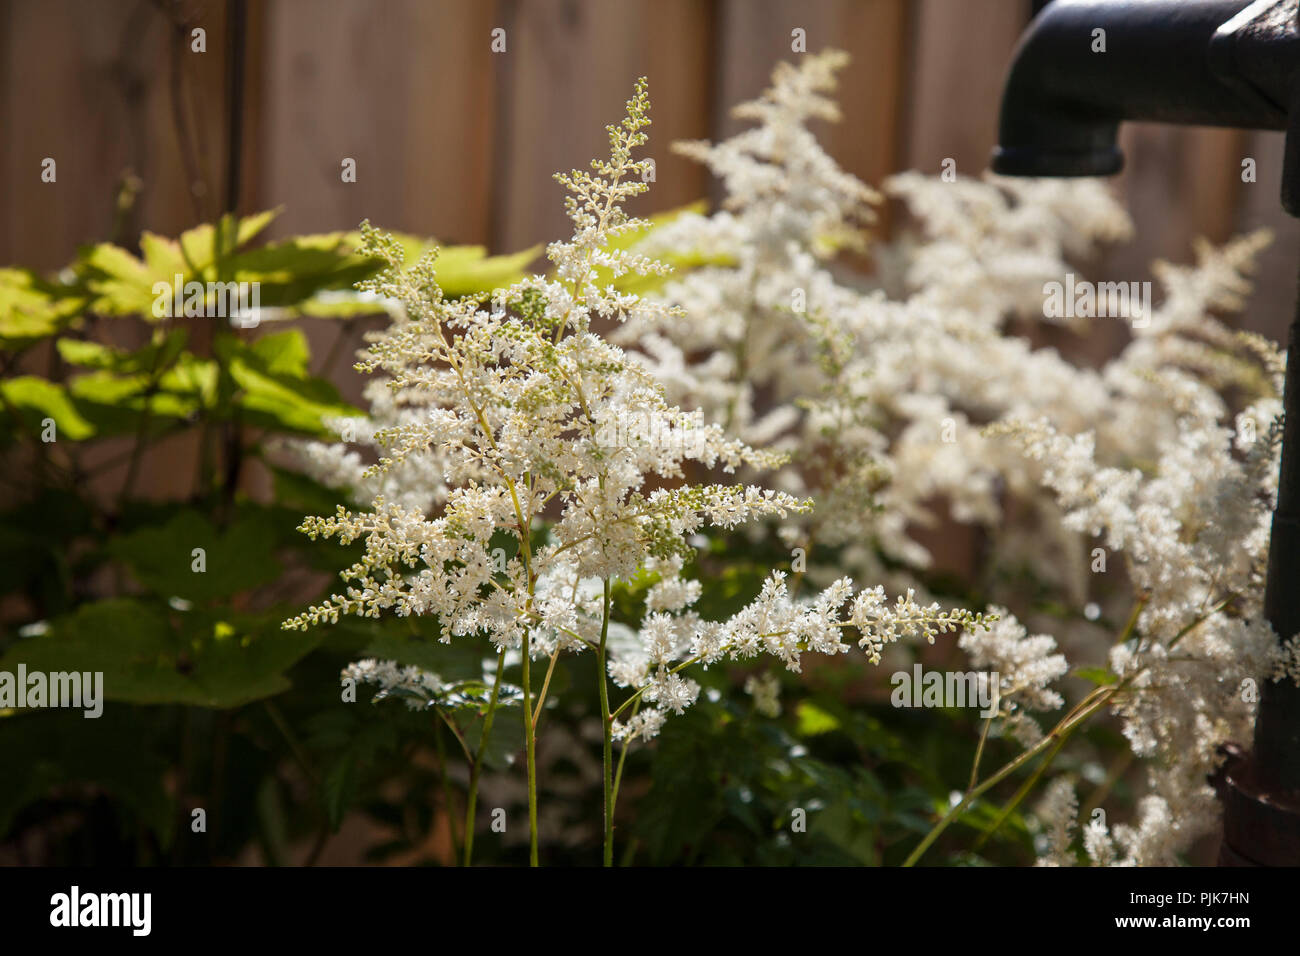 Flowering astilbe, close-up Stock Photo